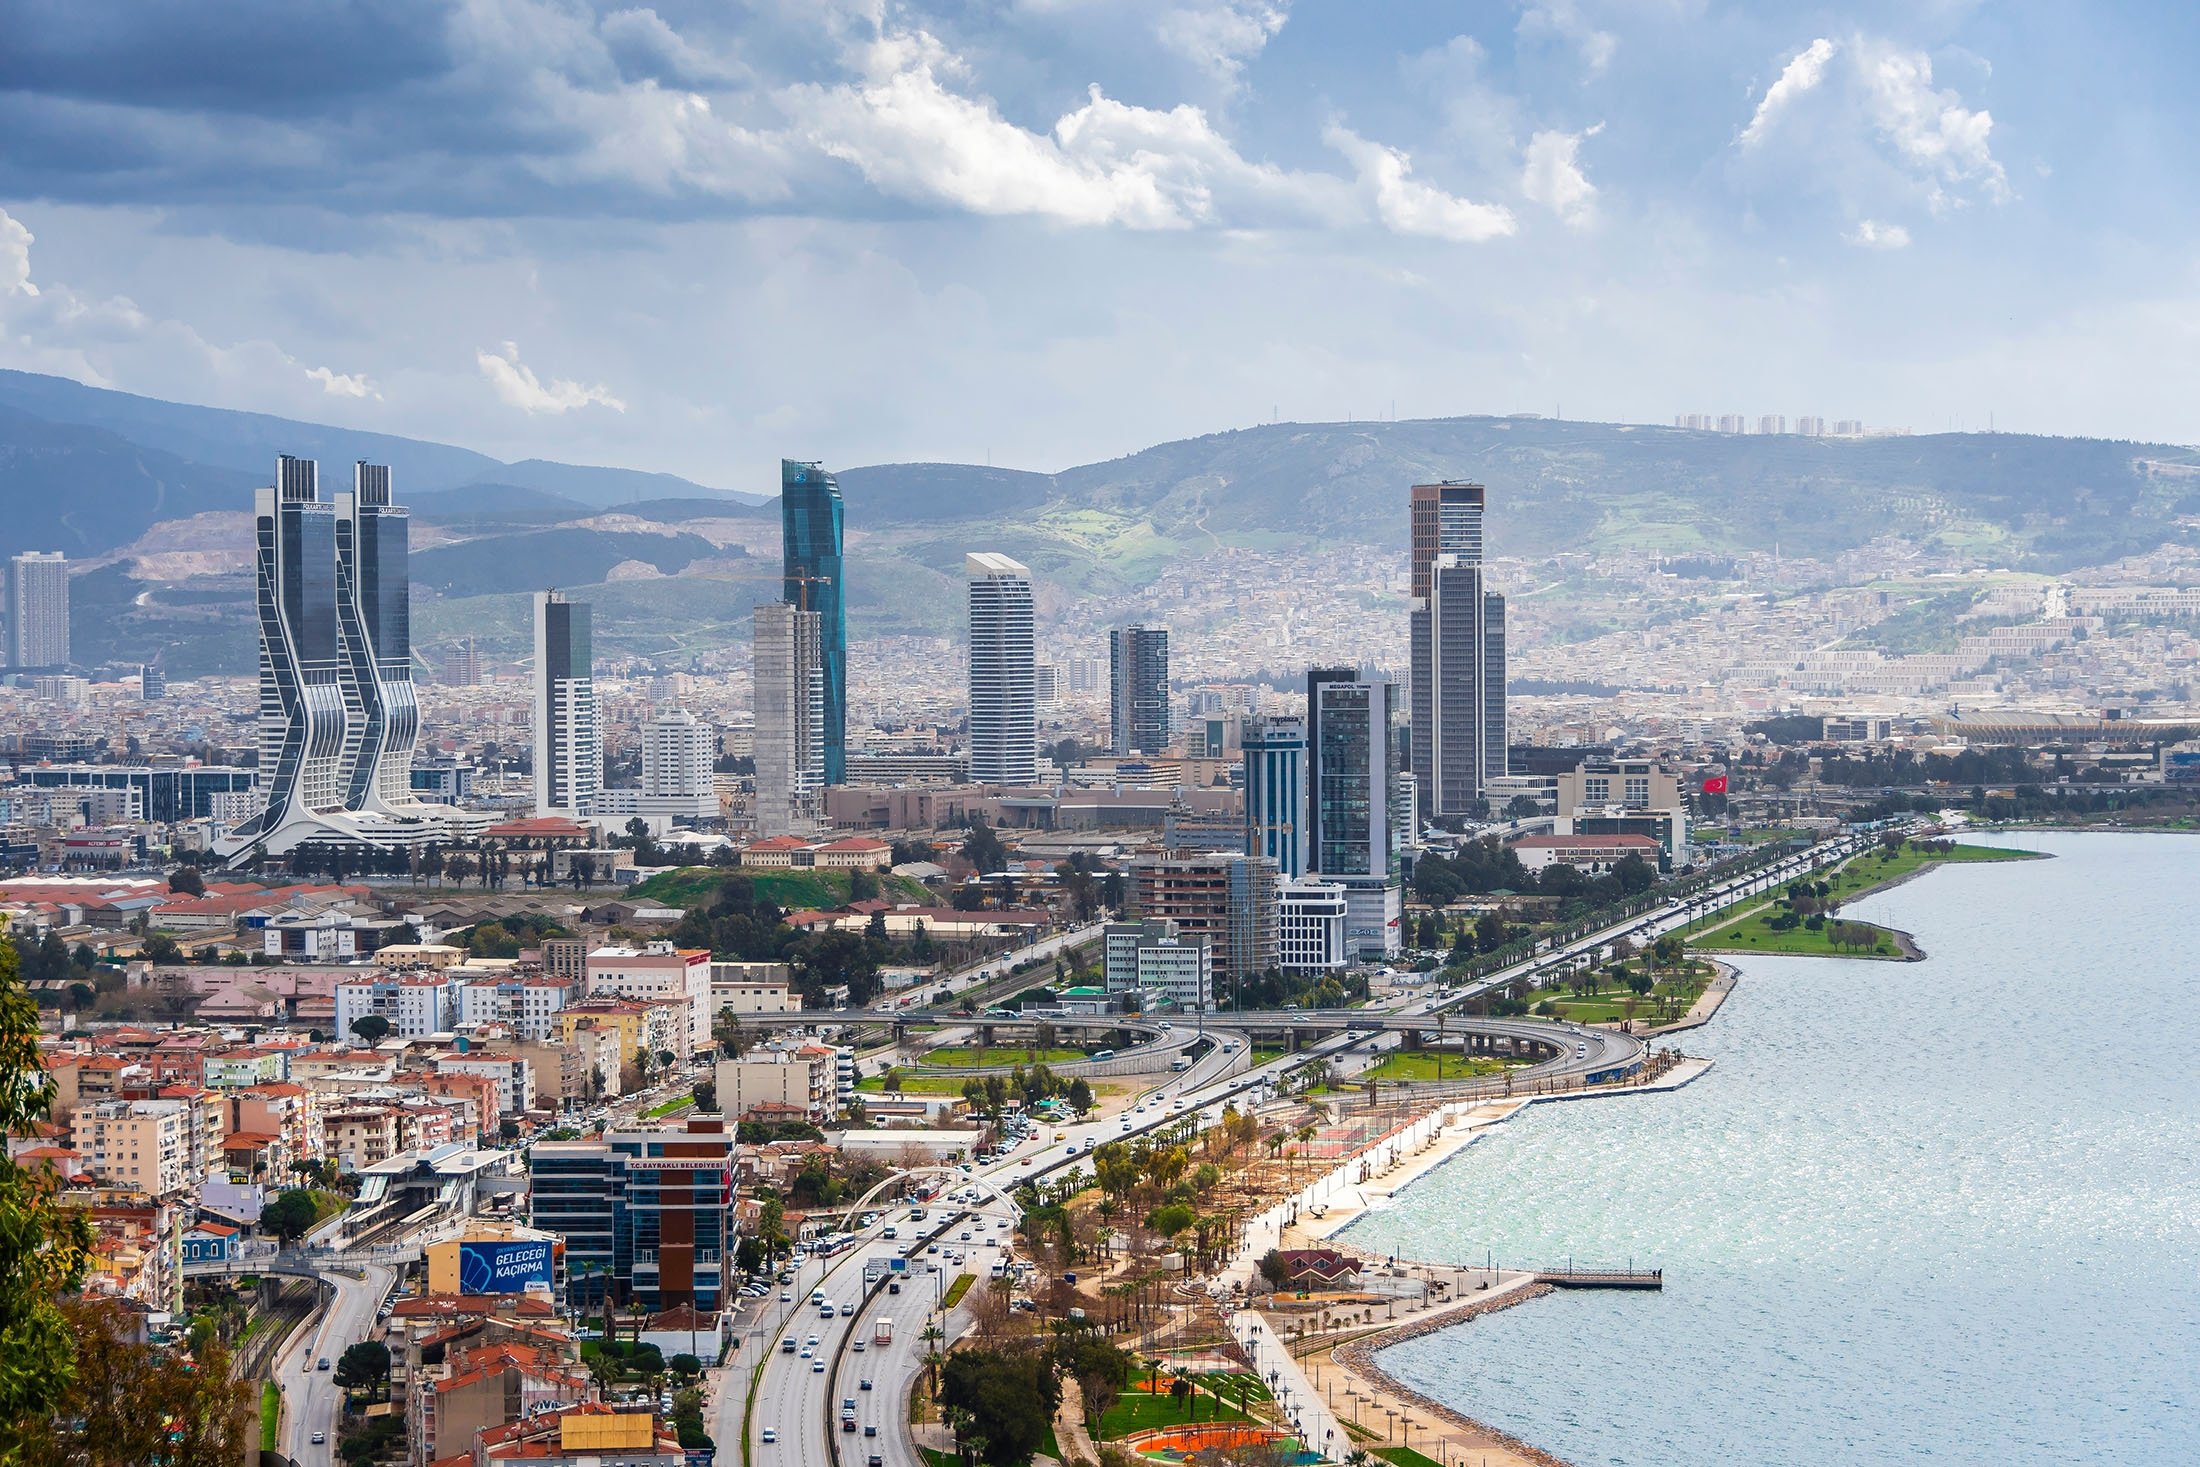 Izmir offers the best of both worlds when it comes to combining city life with rural dwelling. (Shutterstock Photo)